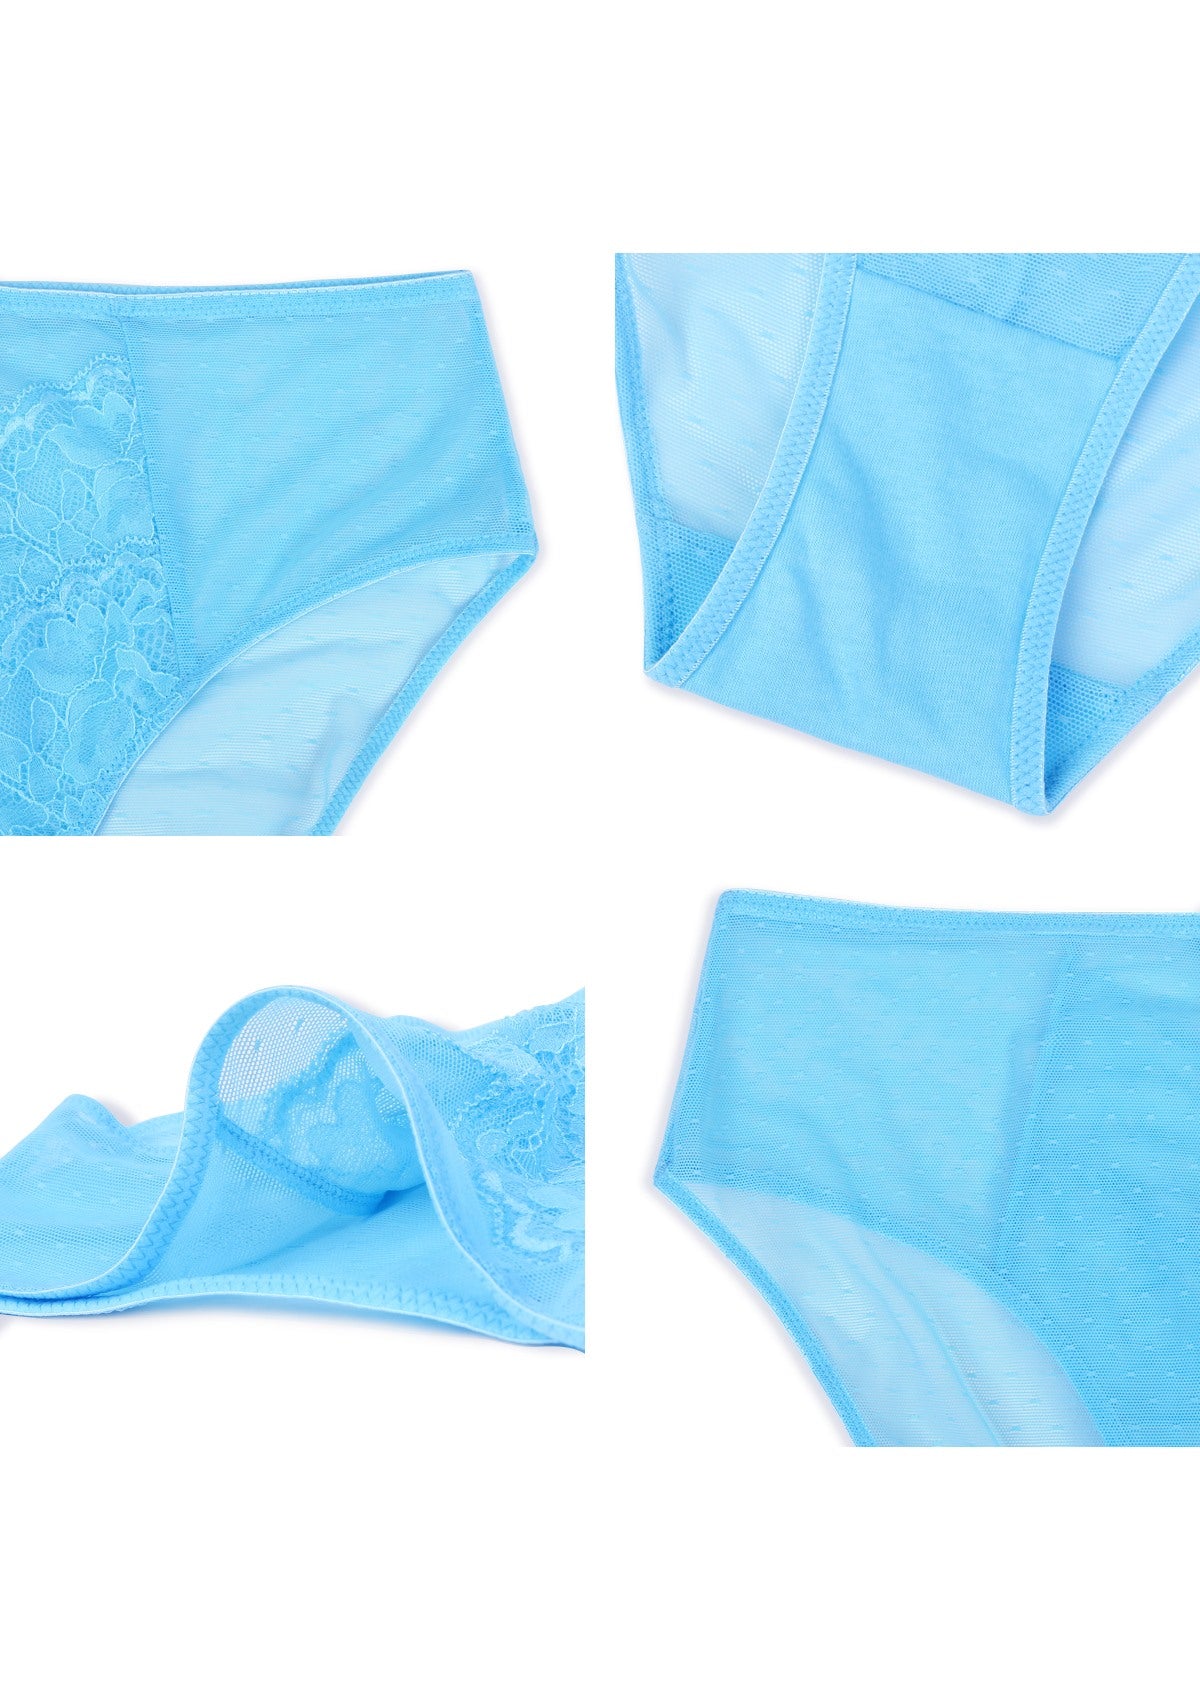 HSIA Enchante High-Rise Floral Lacy Panty-Comfort In Style - XL / Capri Blue